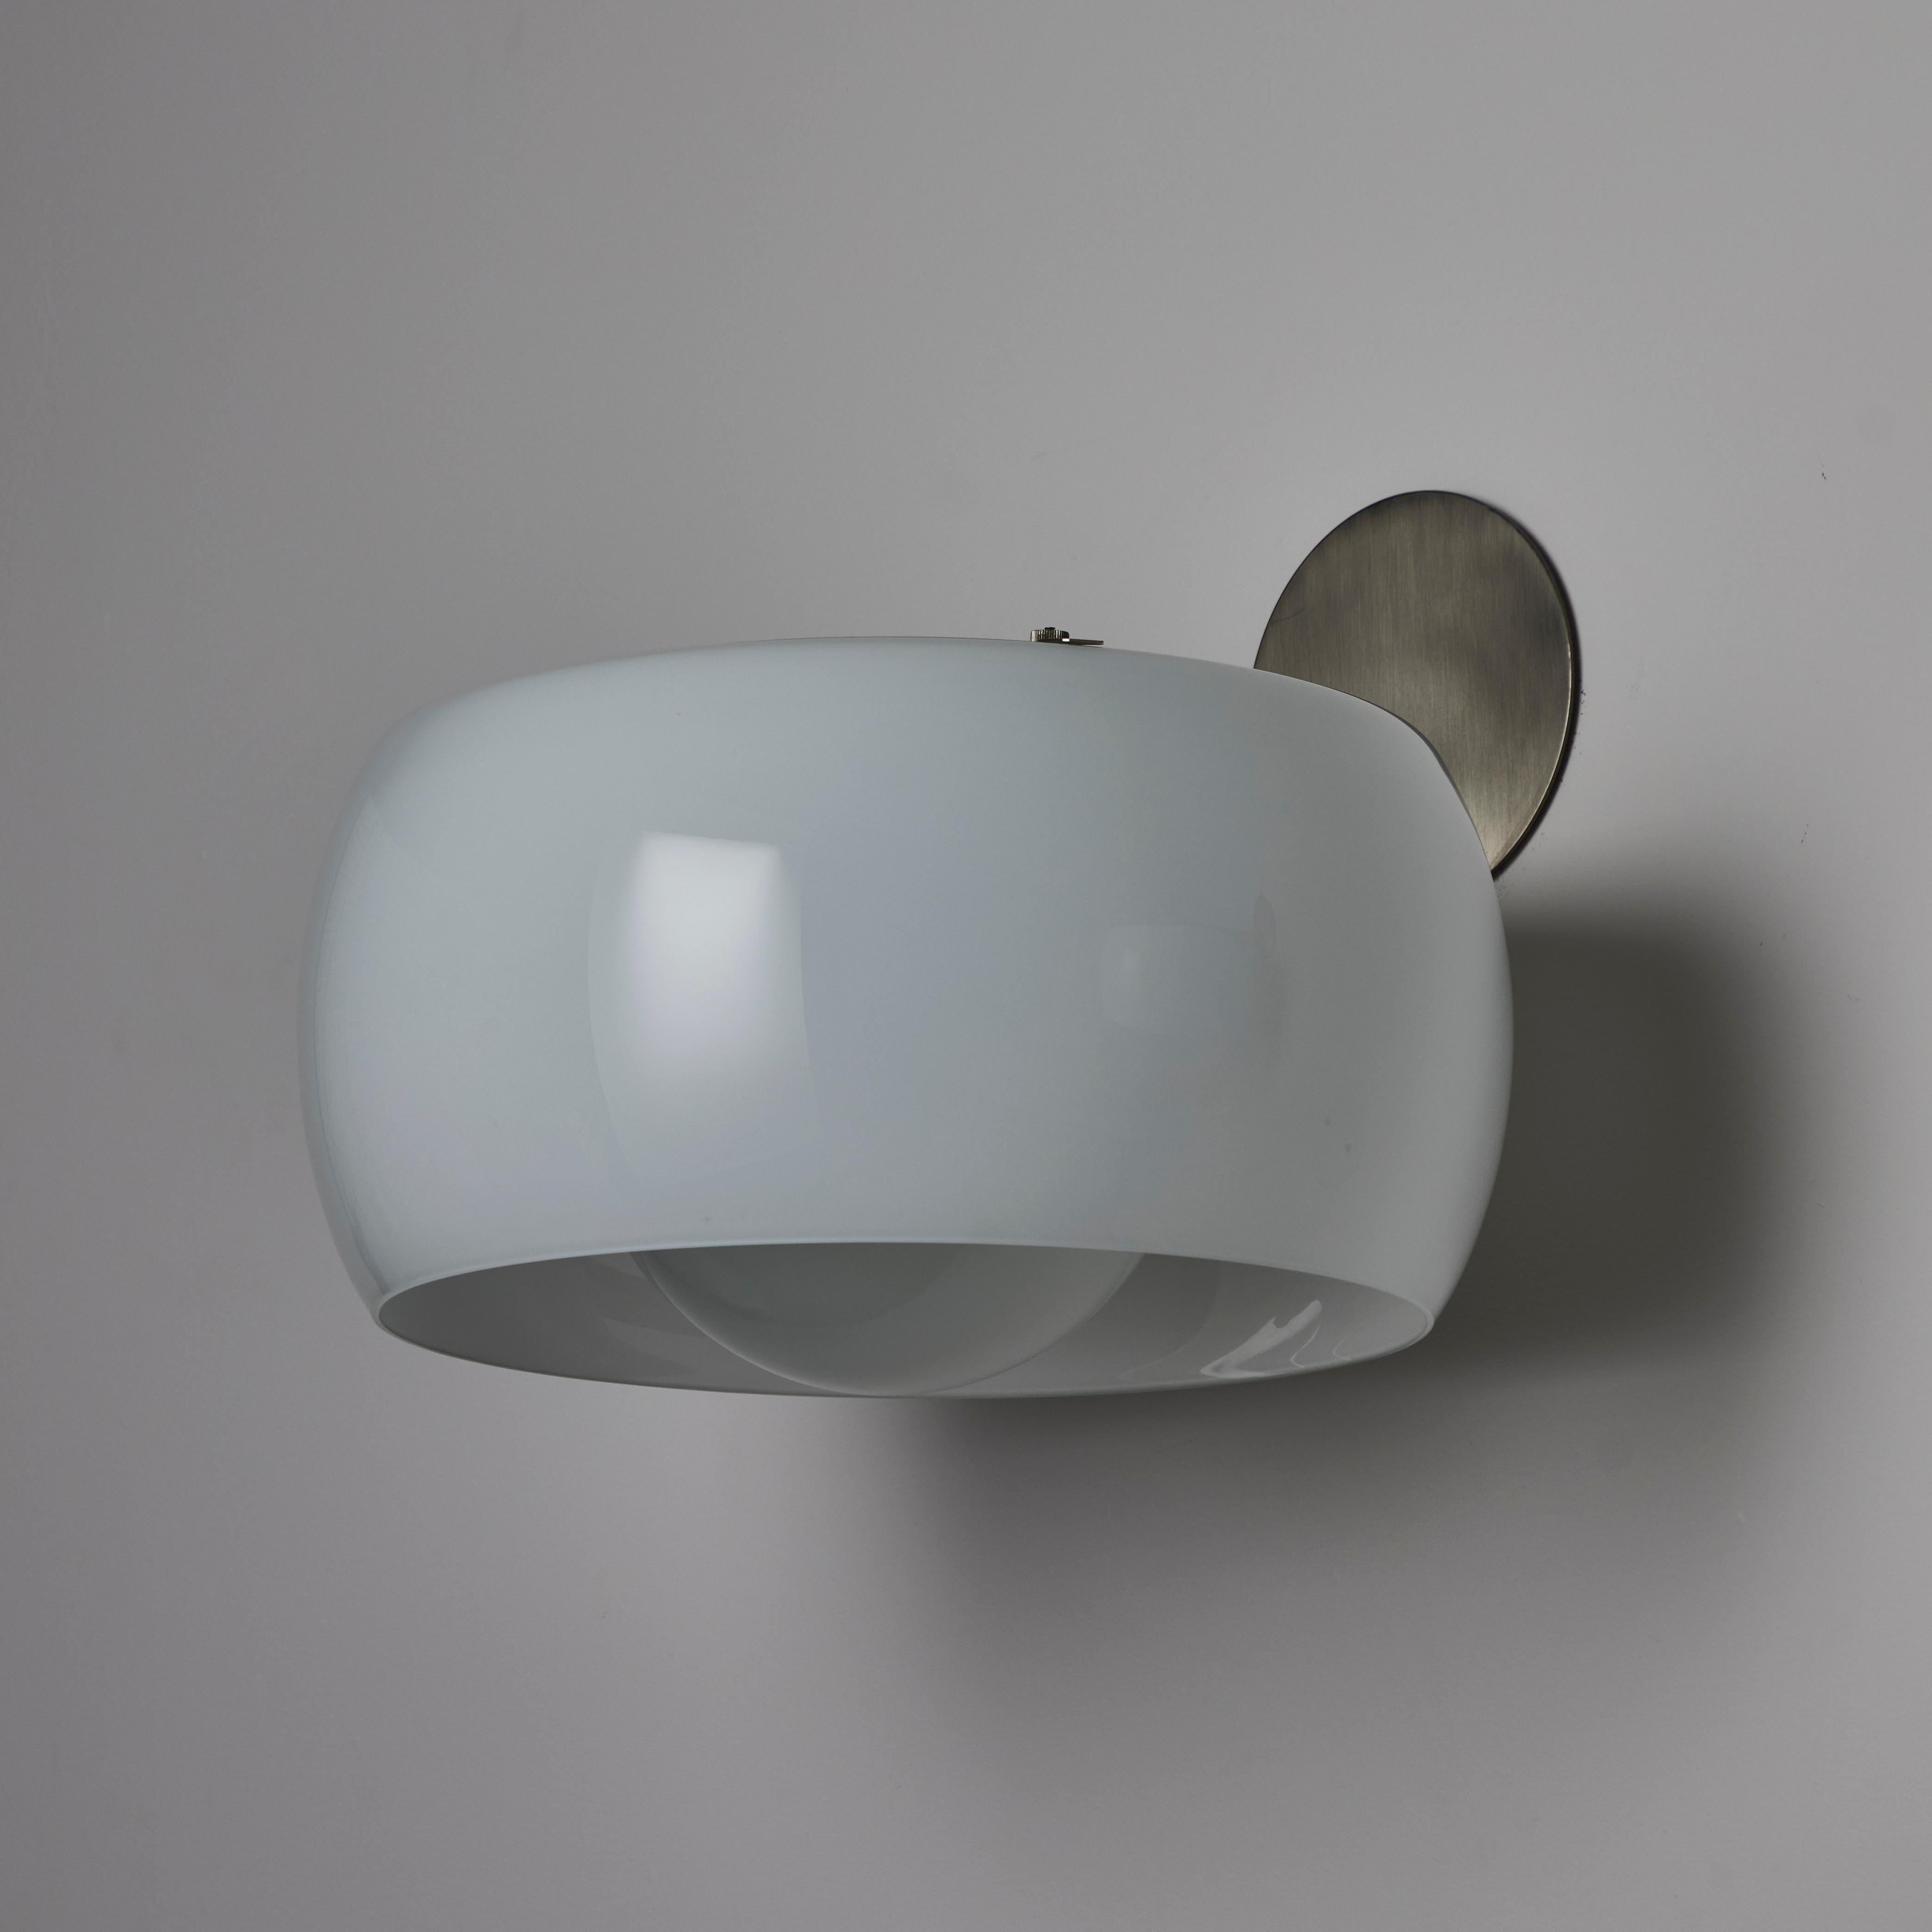 'Clinio' Wall Lights by Vico Magistretti for Artemide In Good Condition For Sale In Los Angeles, CA